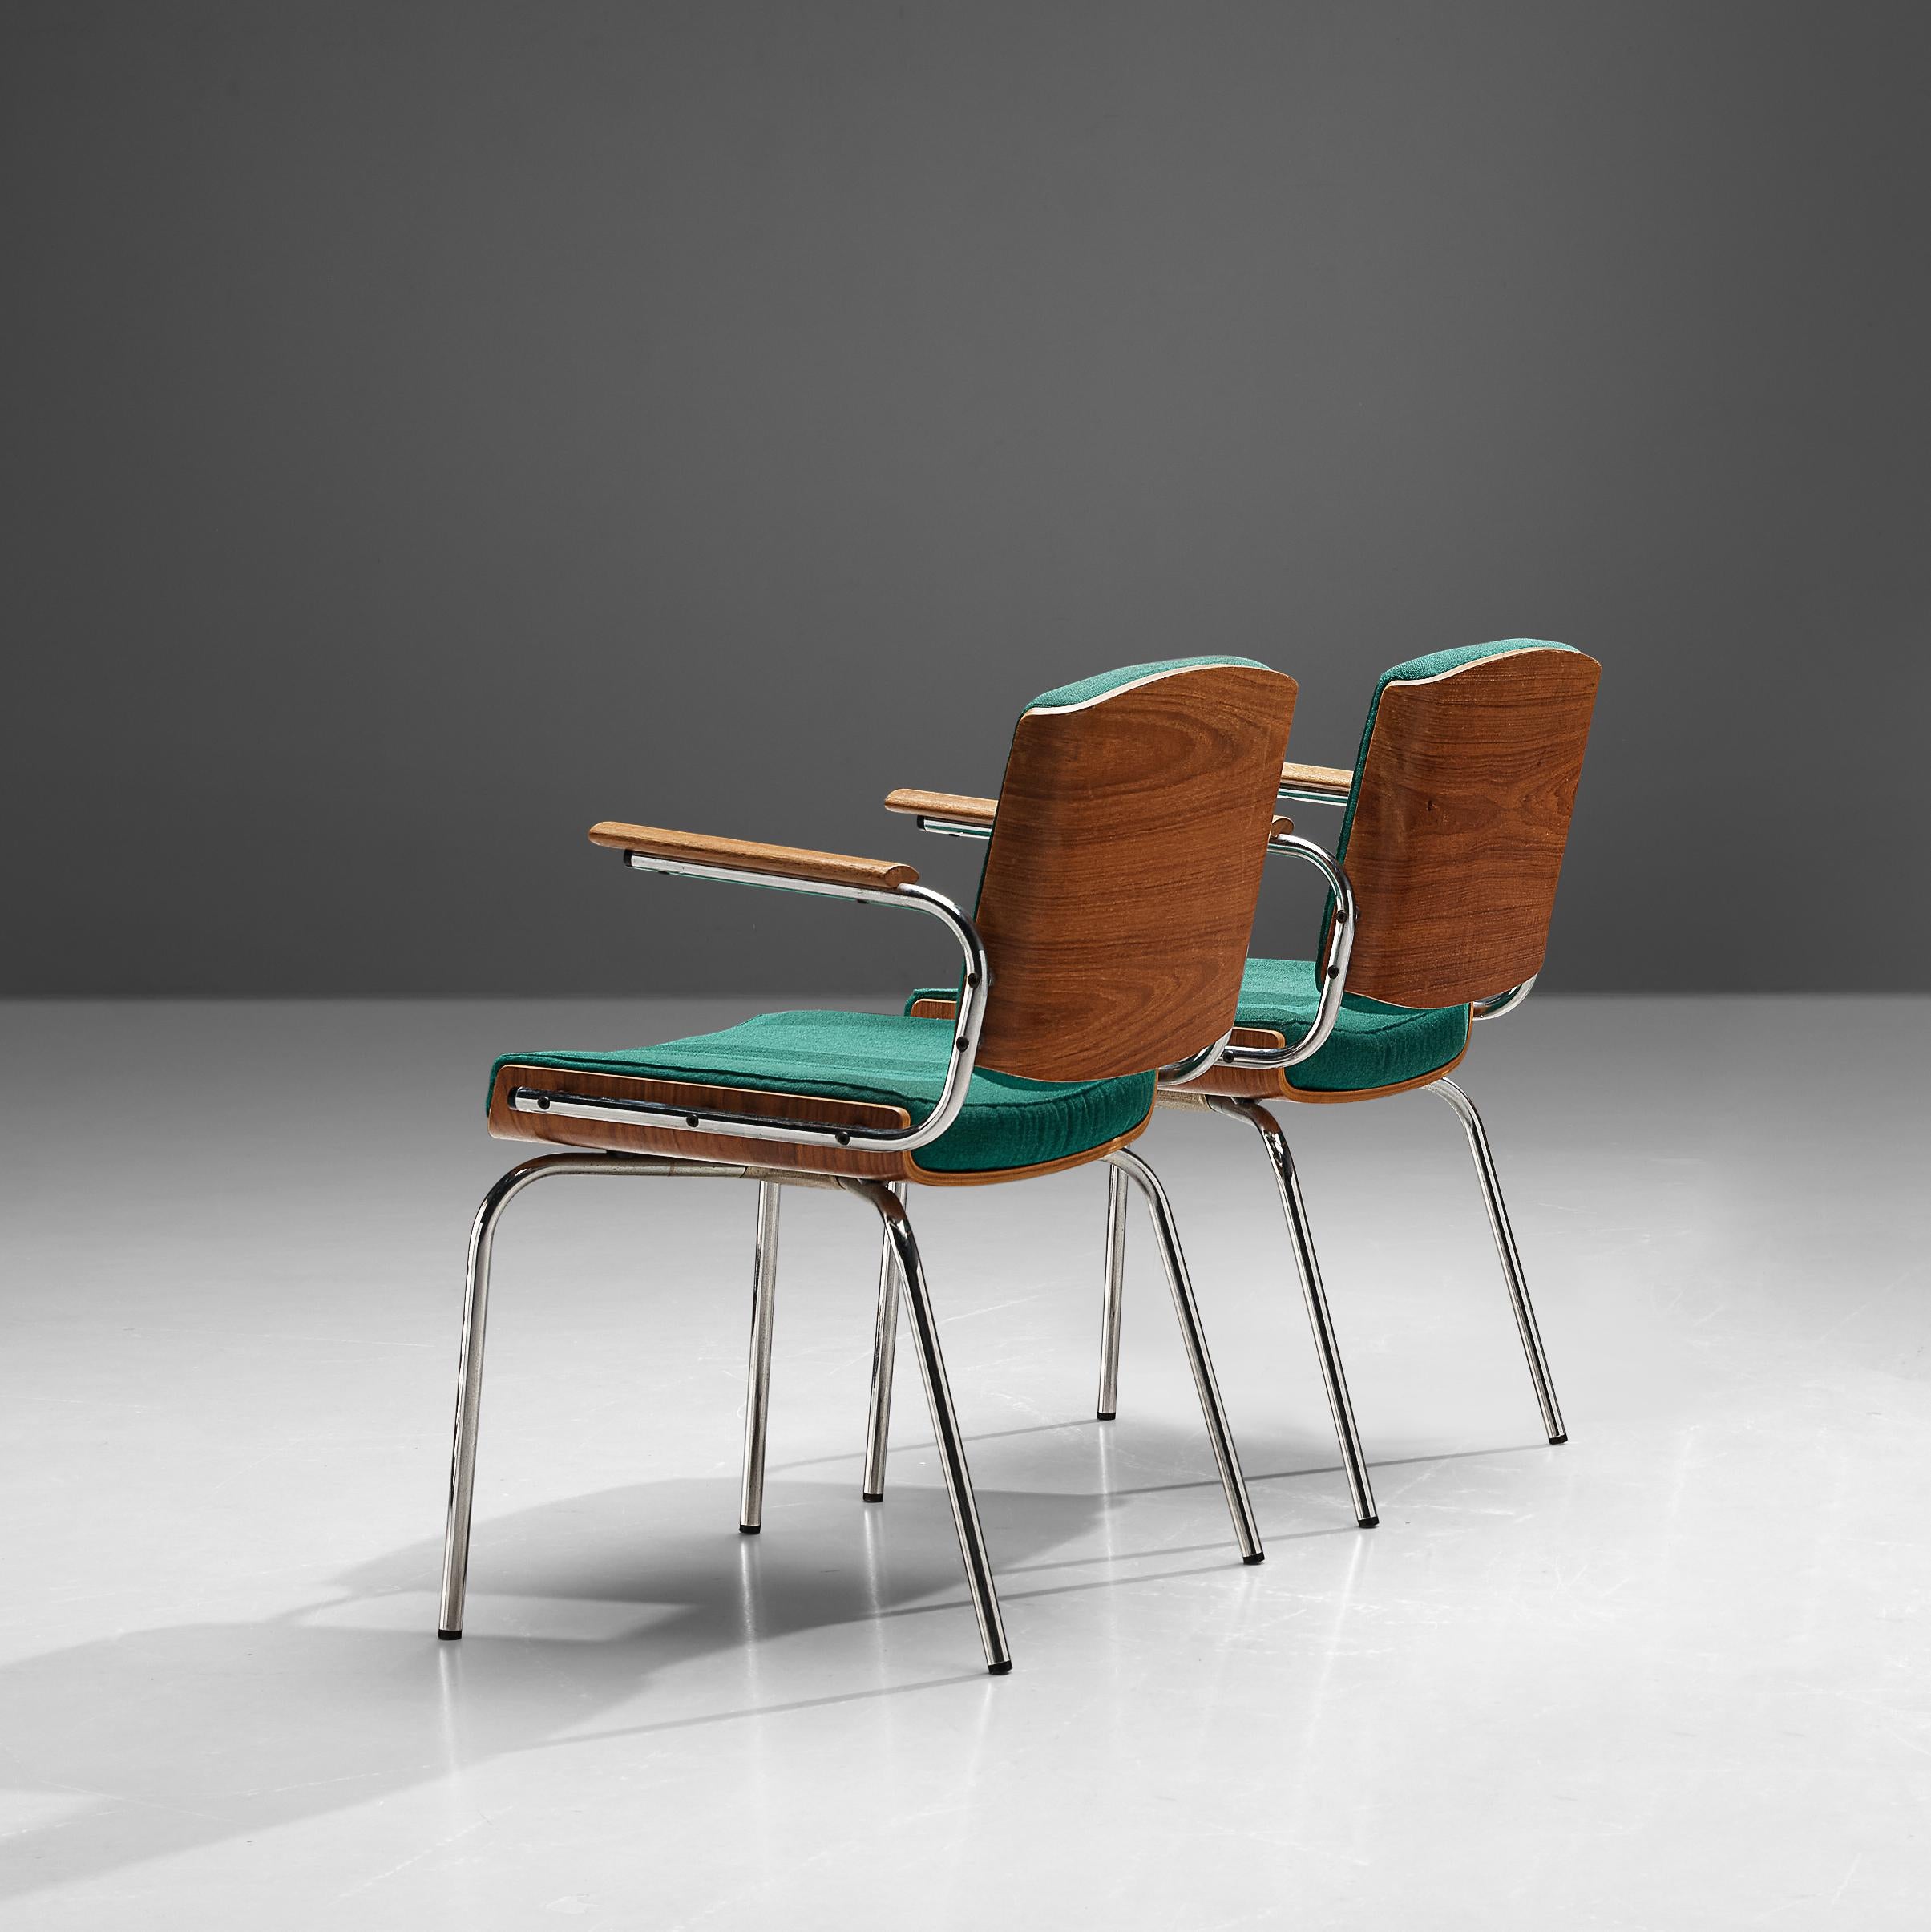 Duba, pair of dining chairs, teak plywood, fabric, chrome-plated steel, Denmark, 1970s

Pair of Danish chairs manufactured by Duba. The design features a striking combination of materials and textures. The back of the backrest and frame of the seat